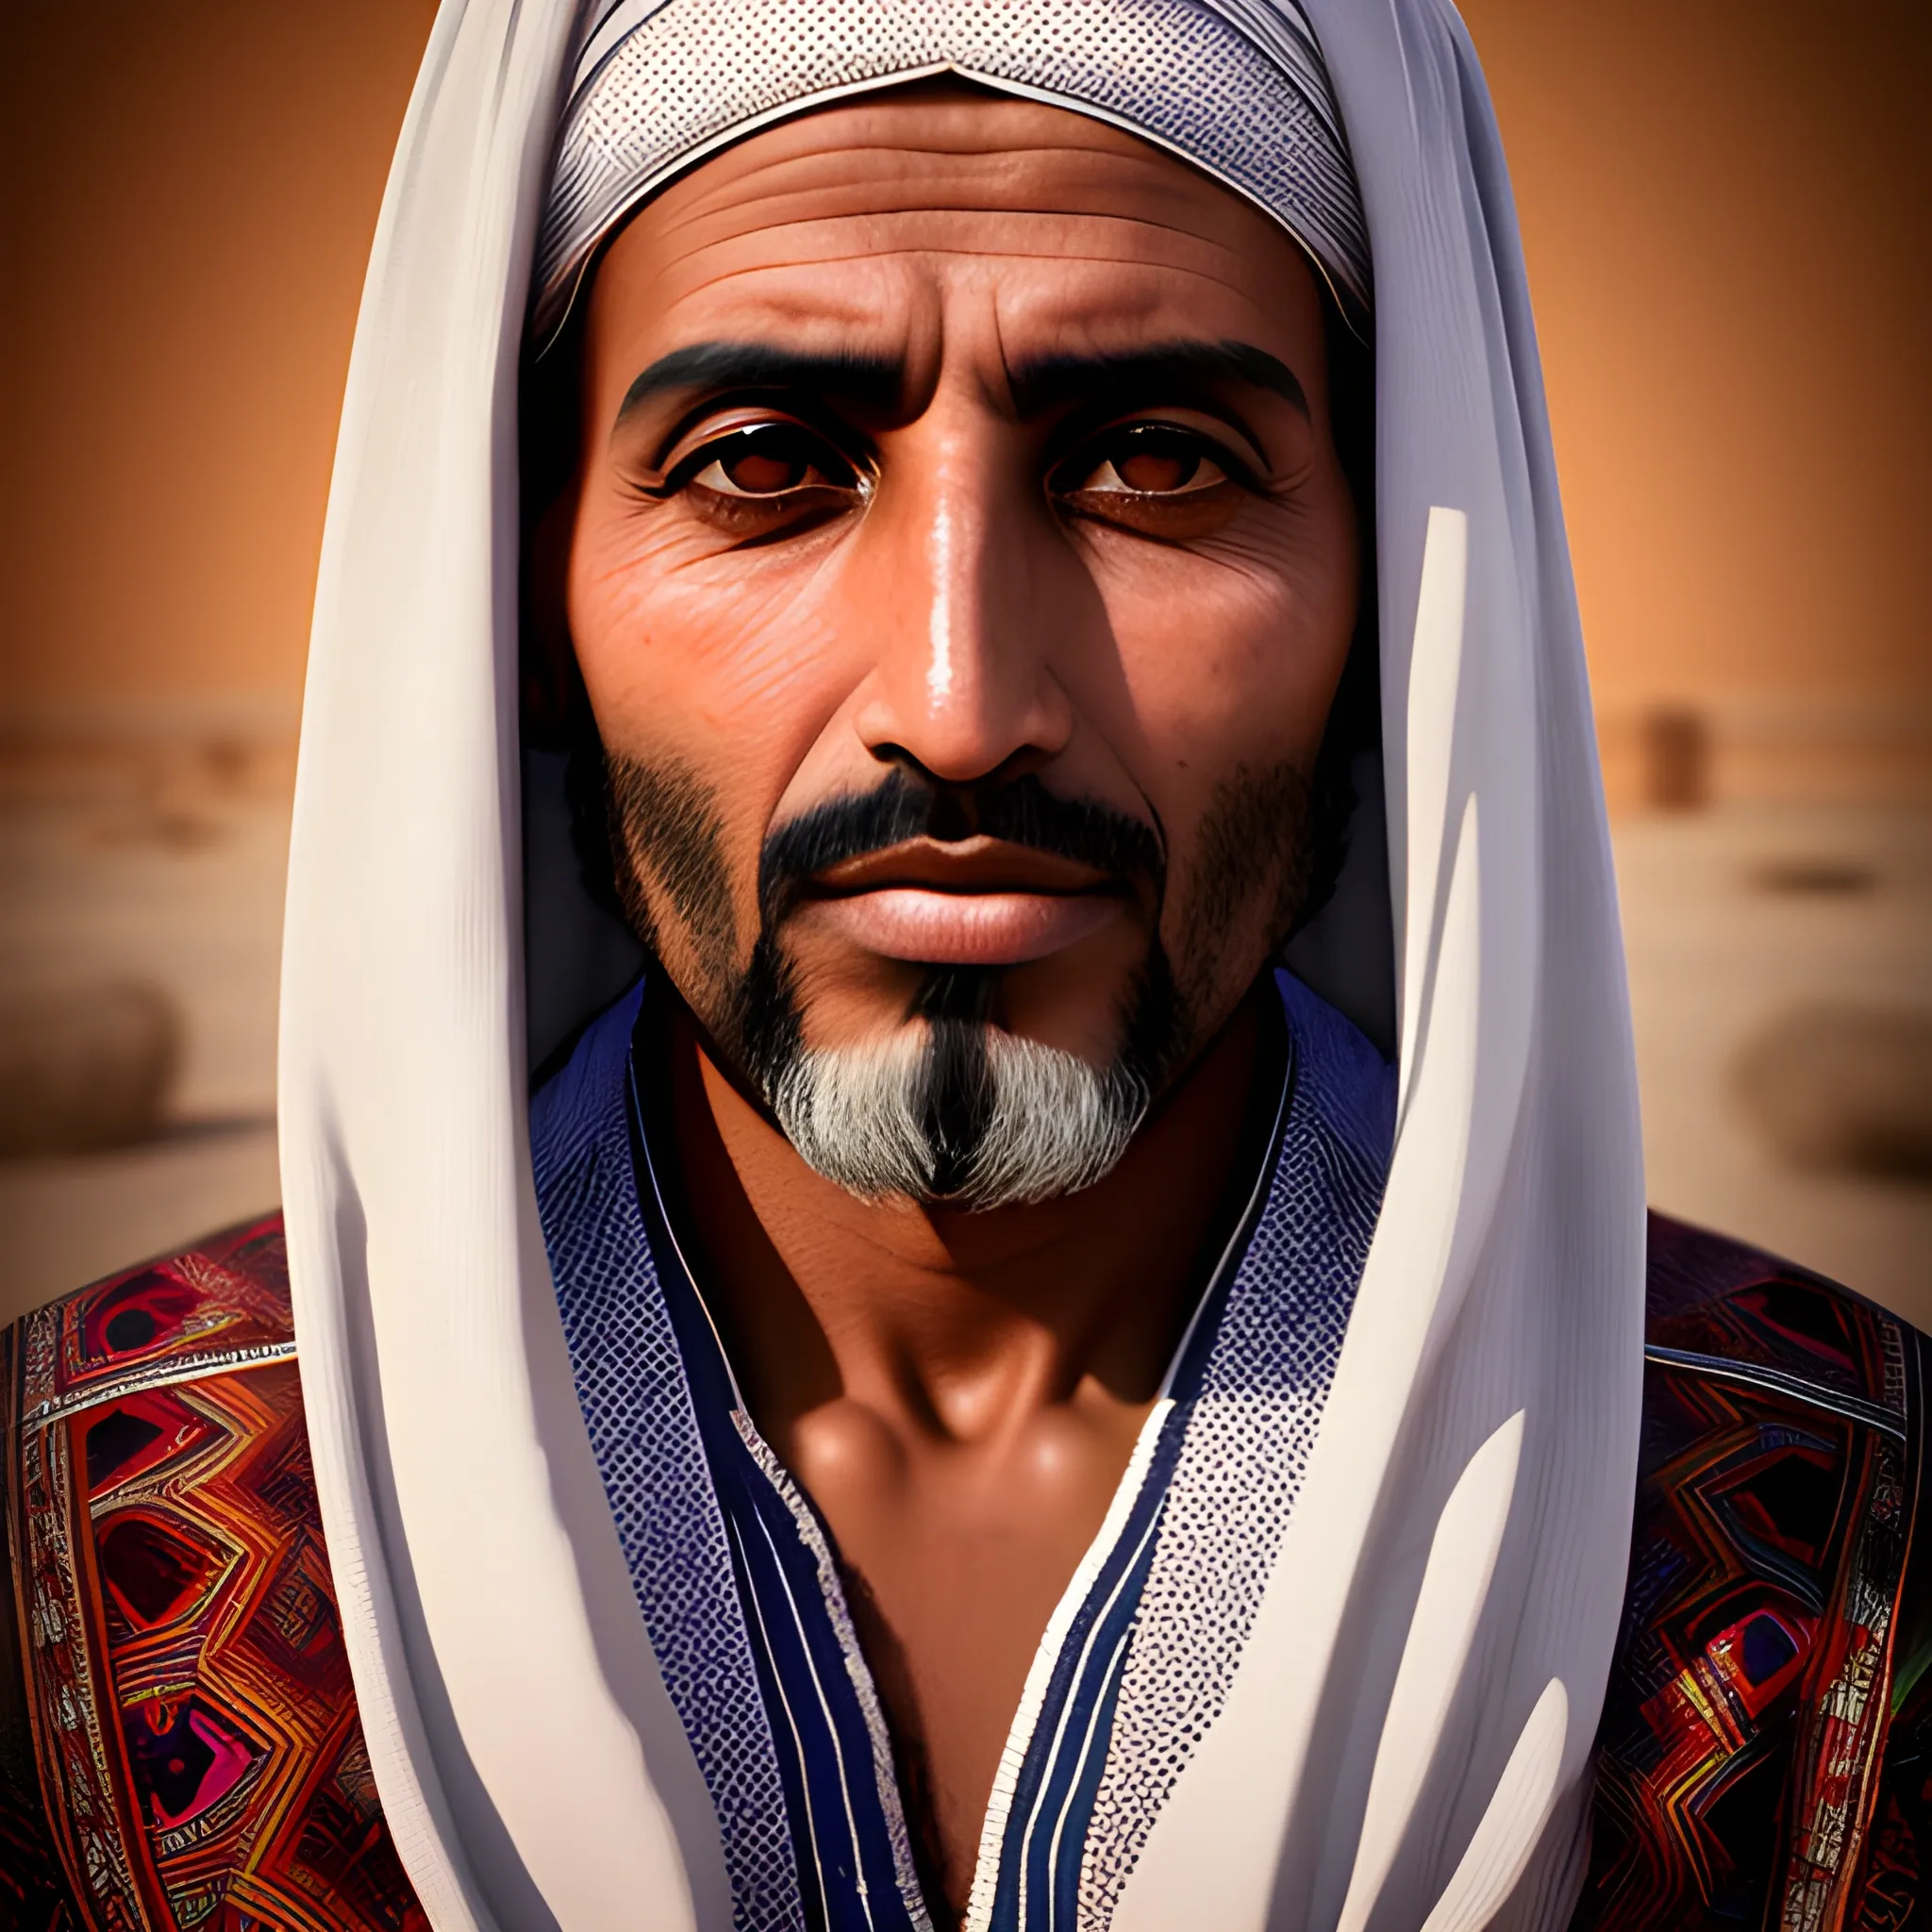 Moroccan man, big eyes, extreme picture quality, ambient light, exquisite facial features, 3D